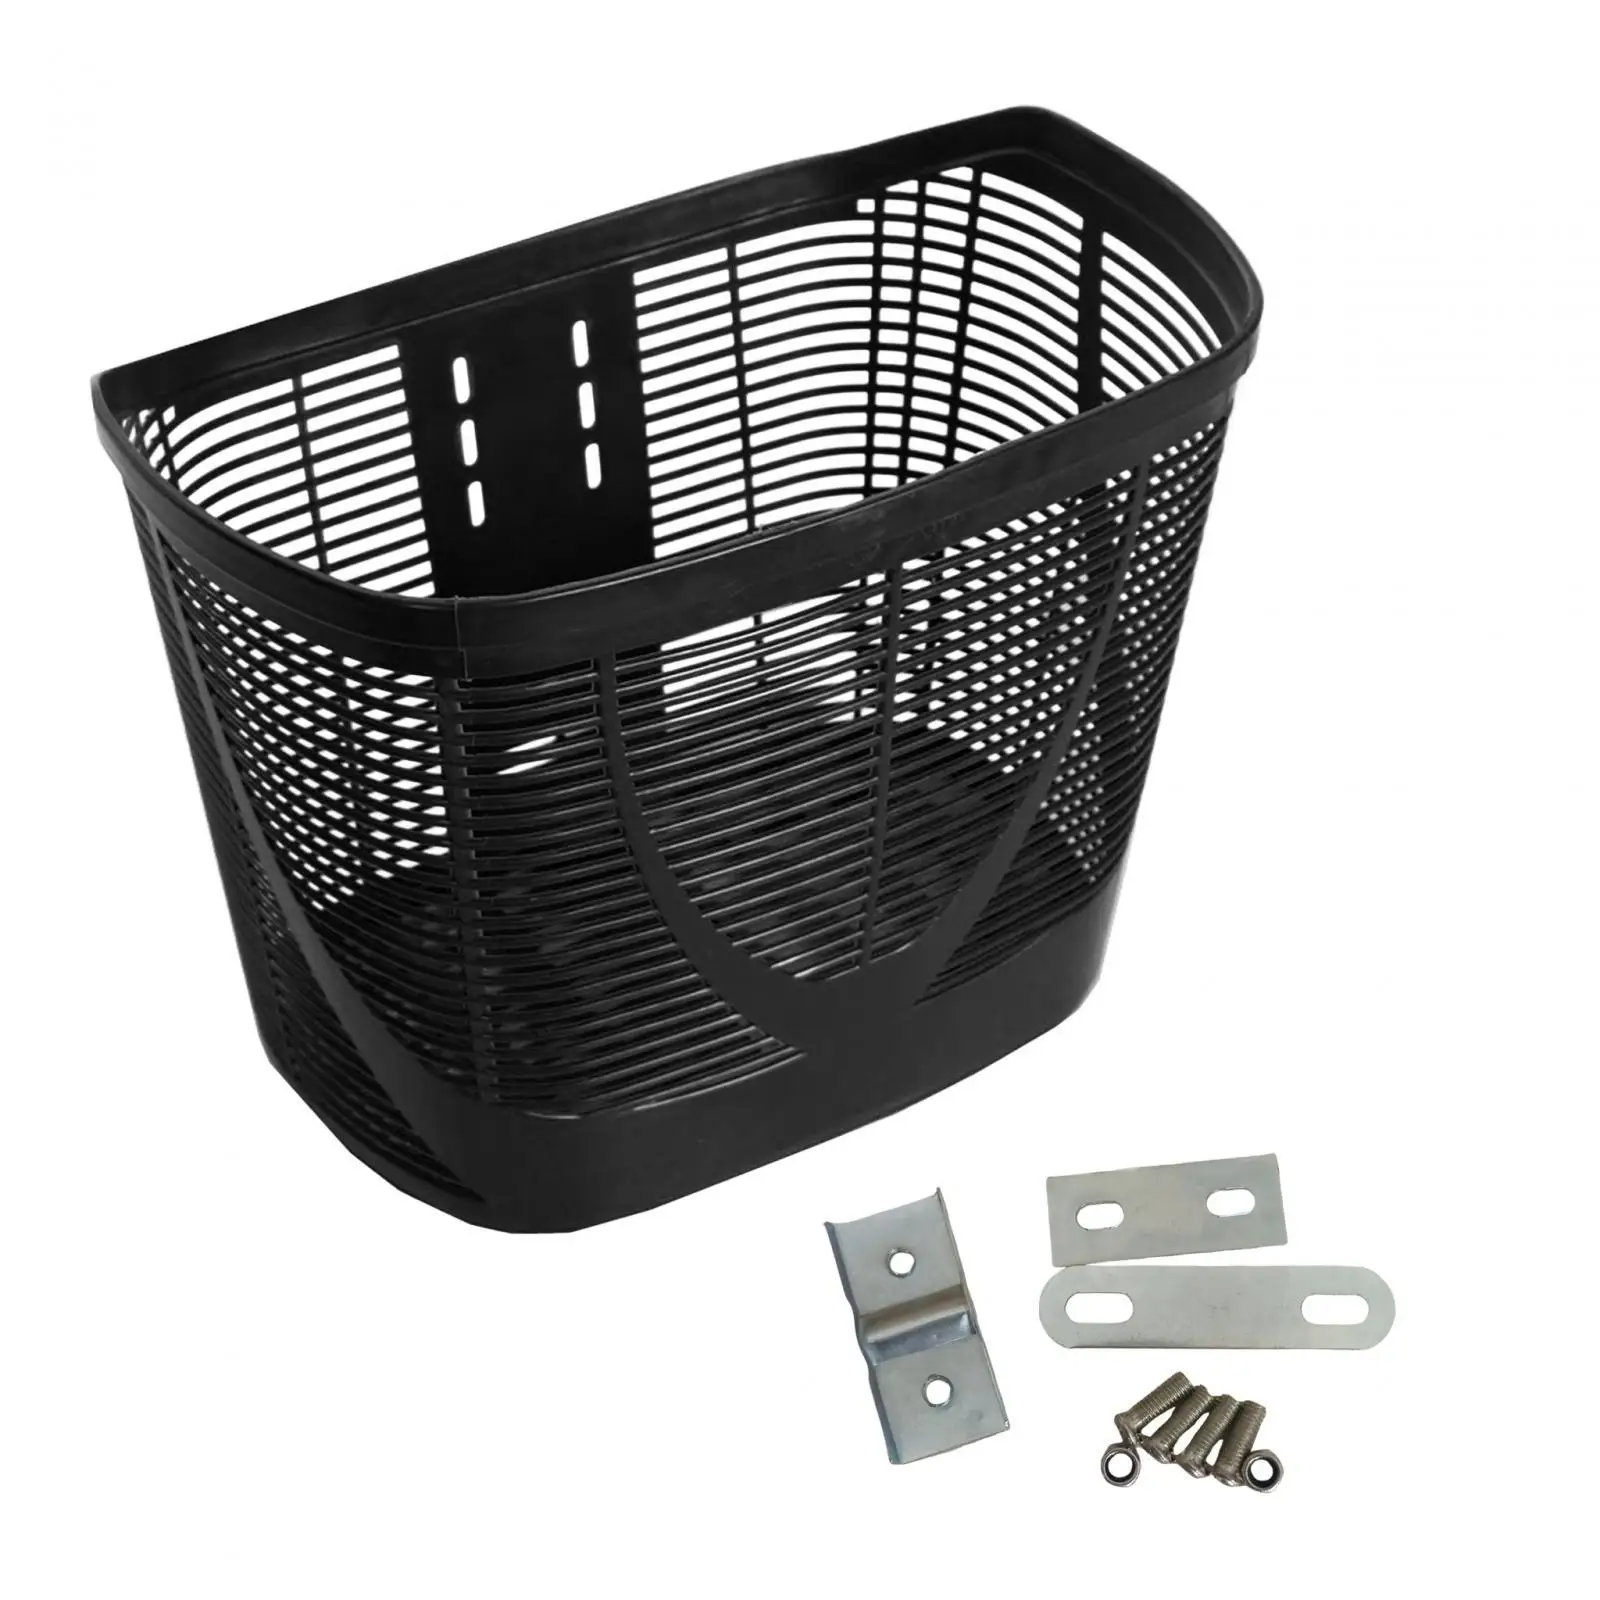 Bike Front Basket Men Women Bicycle Storage Basket Easy to Install for Camping Grocery Shopping